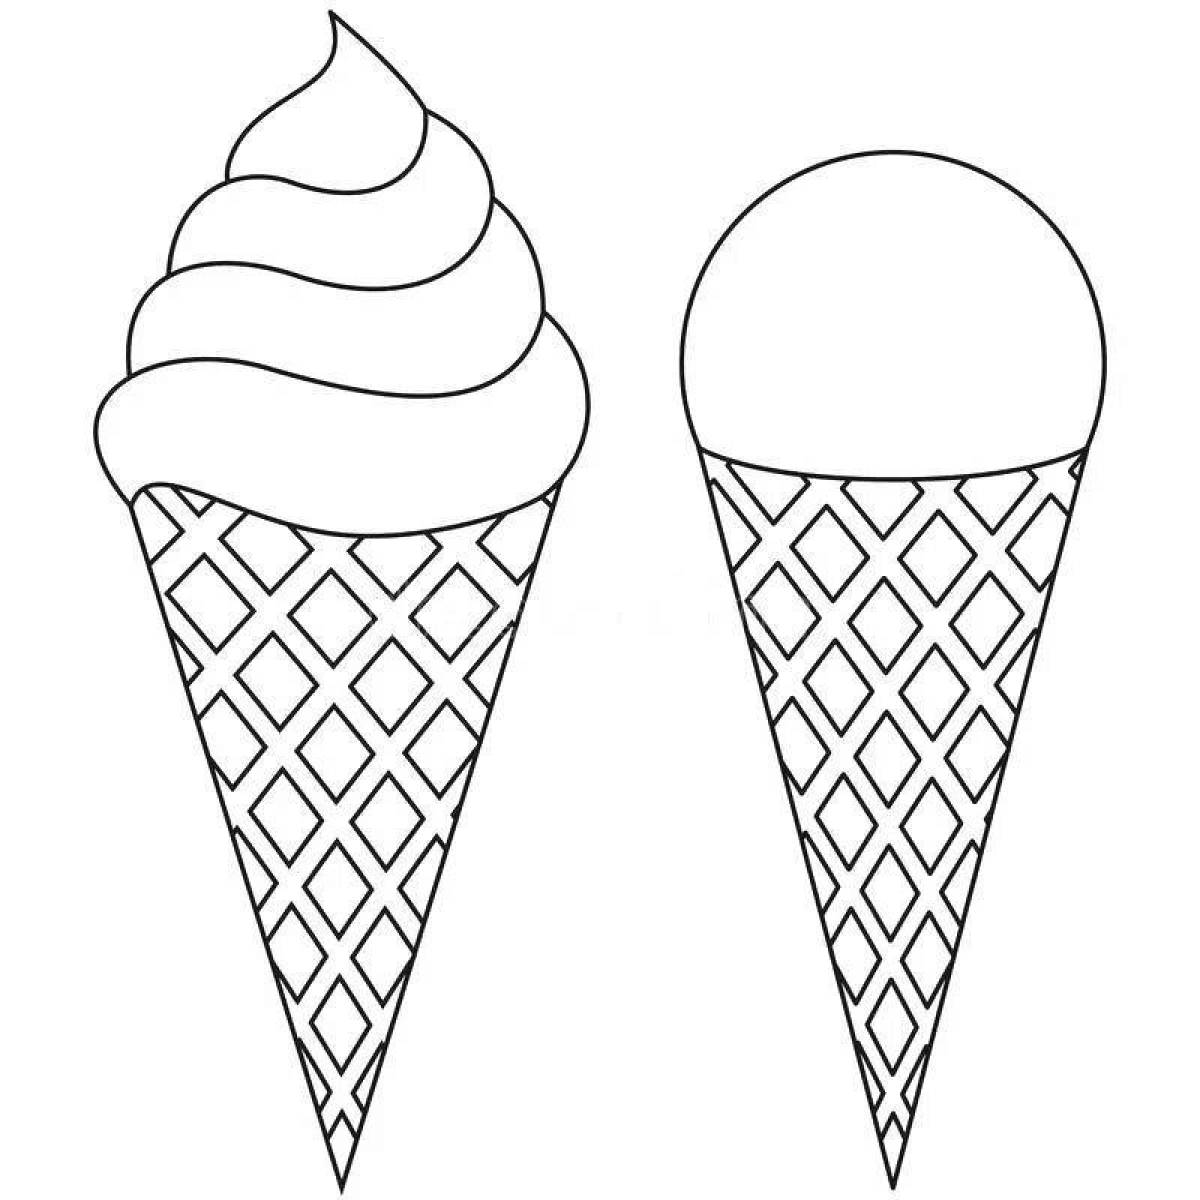 Coloring page beautiful ice cream cone